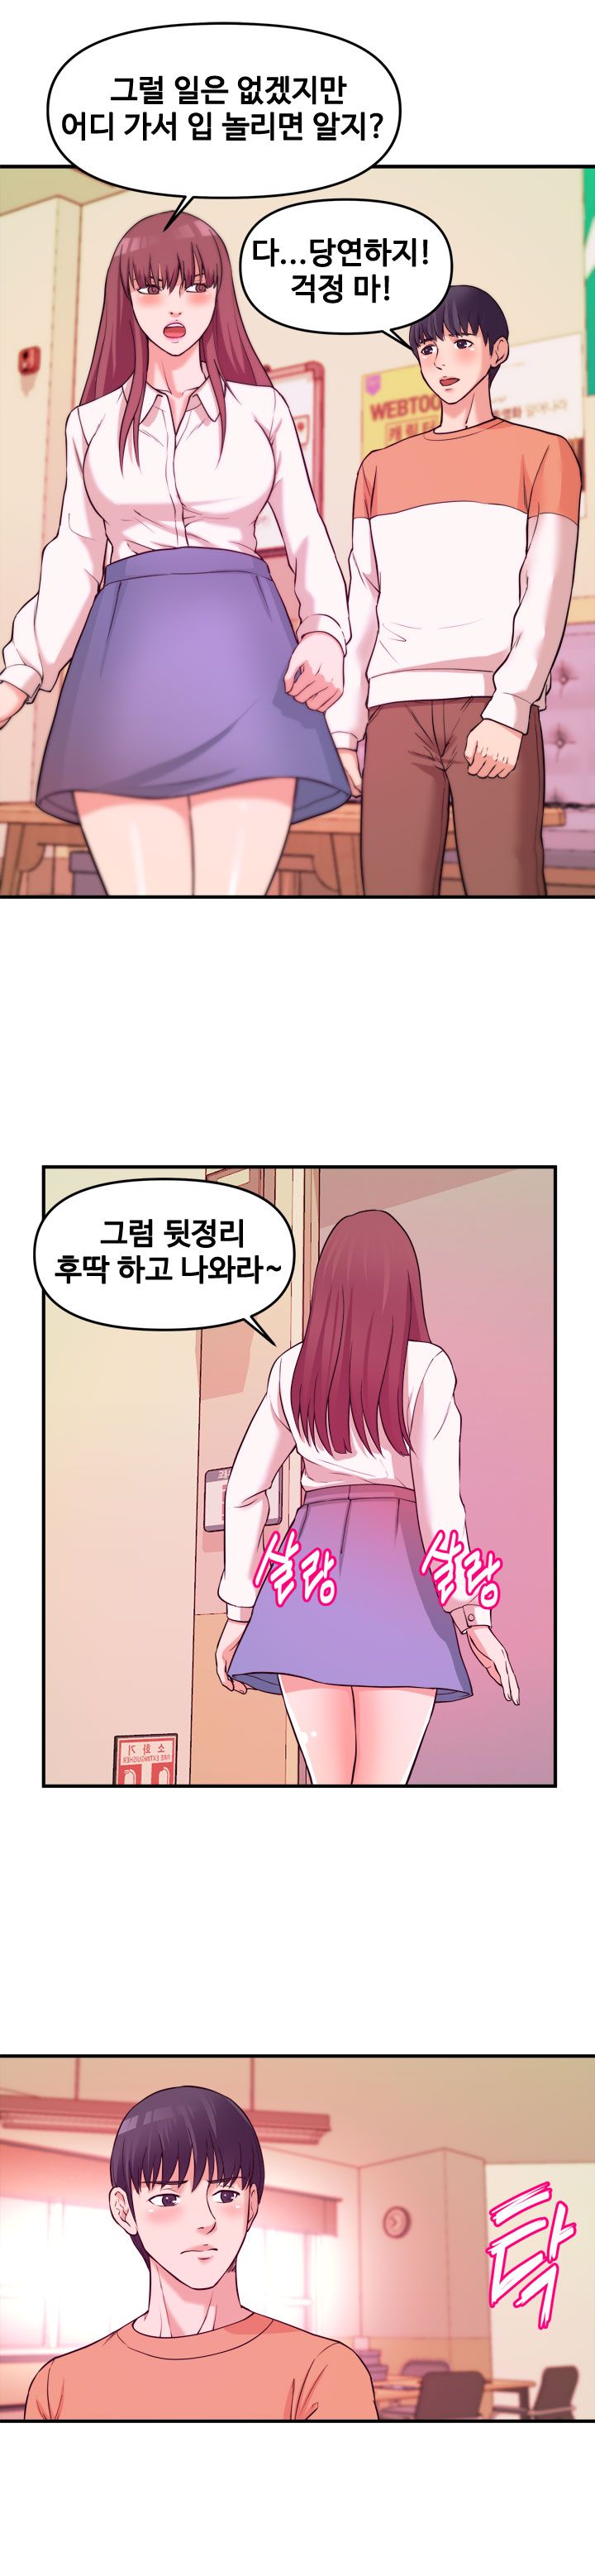 Female College Student Raw - Chapter 2 Page 16